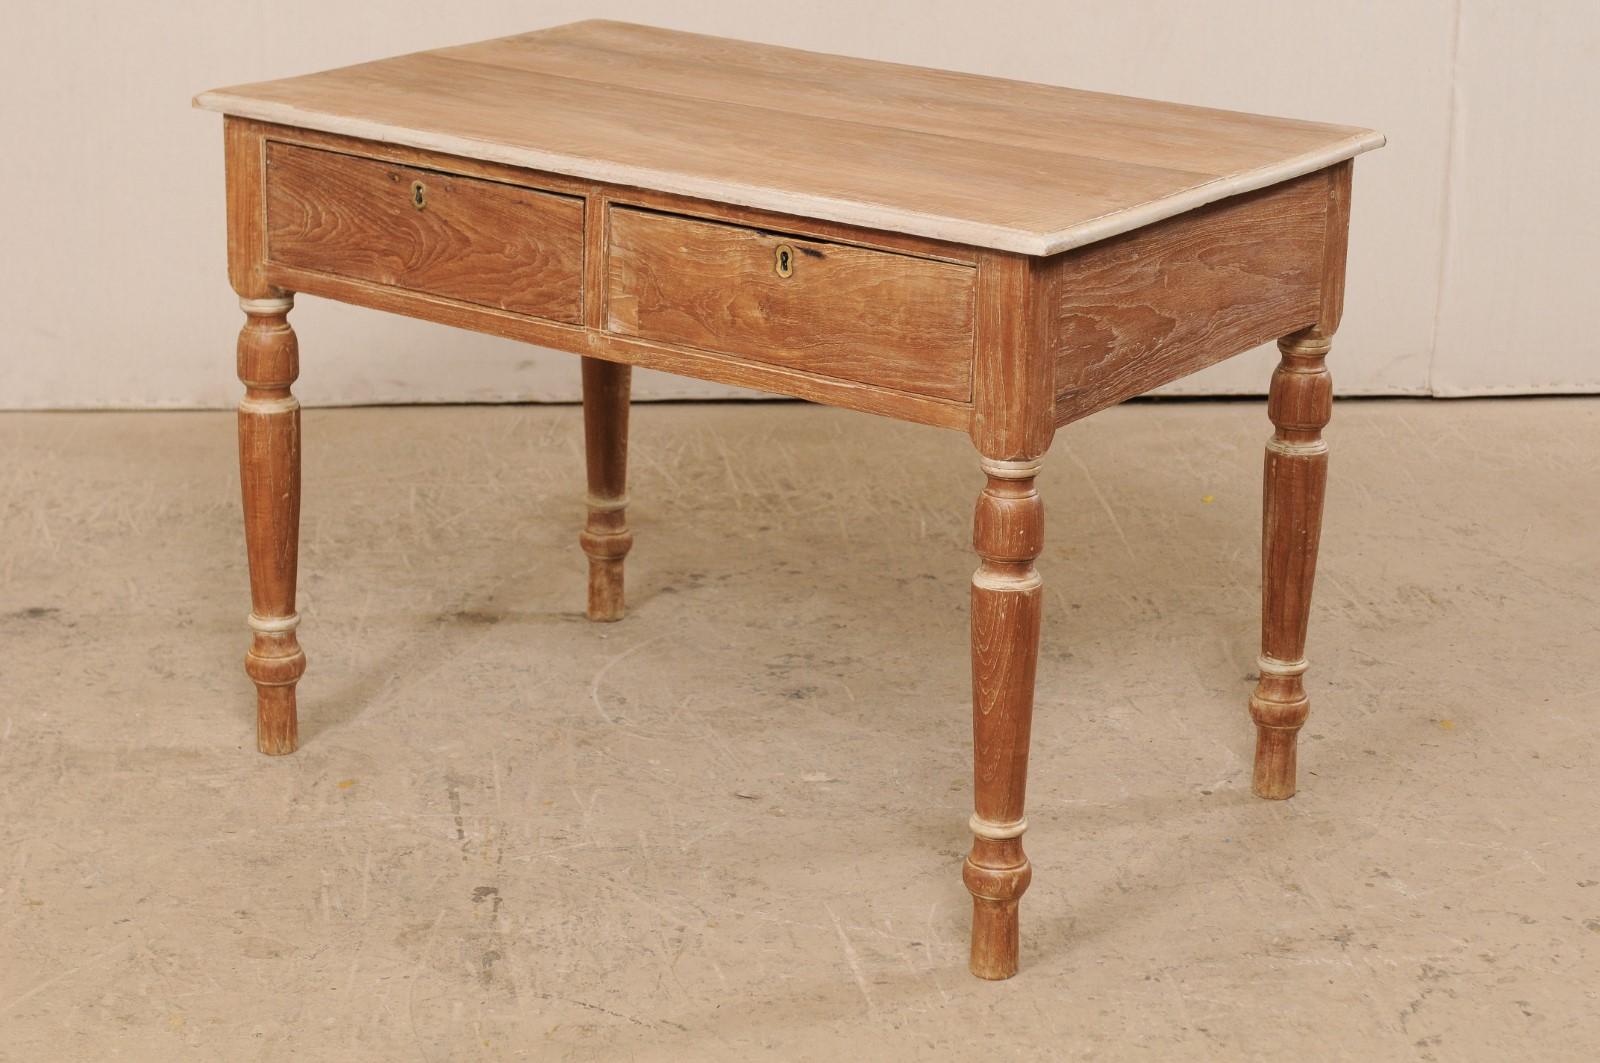 Early 20th Century British Colonial Occasional Table with Drawers 1